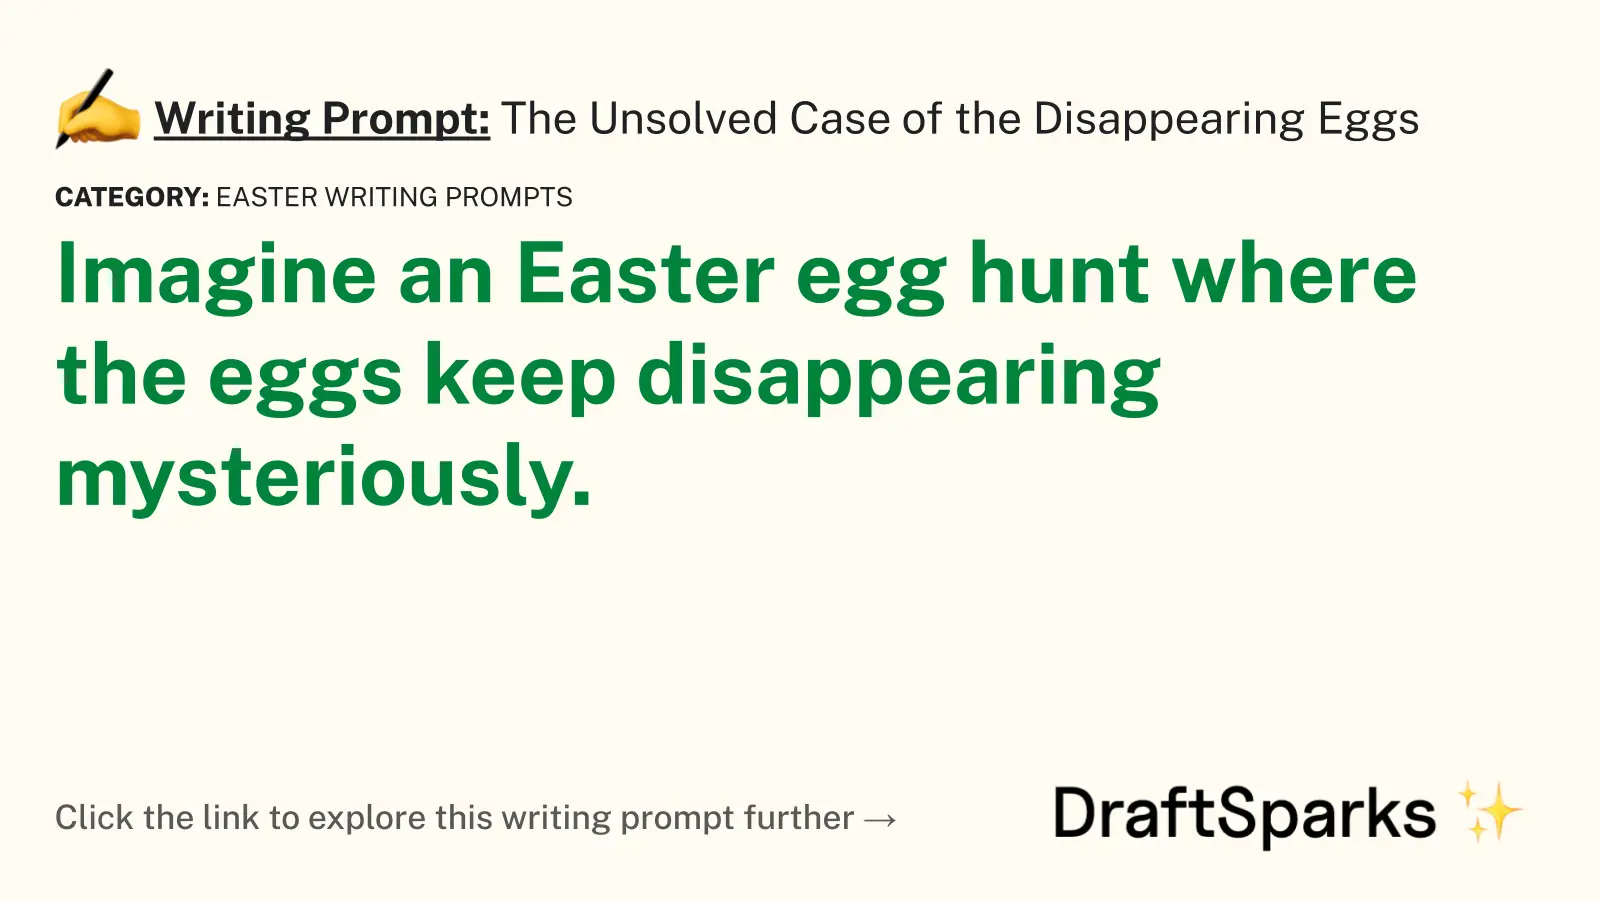 The Unsolved Case of the Disappearing Eggs